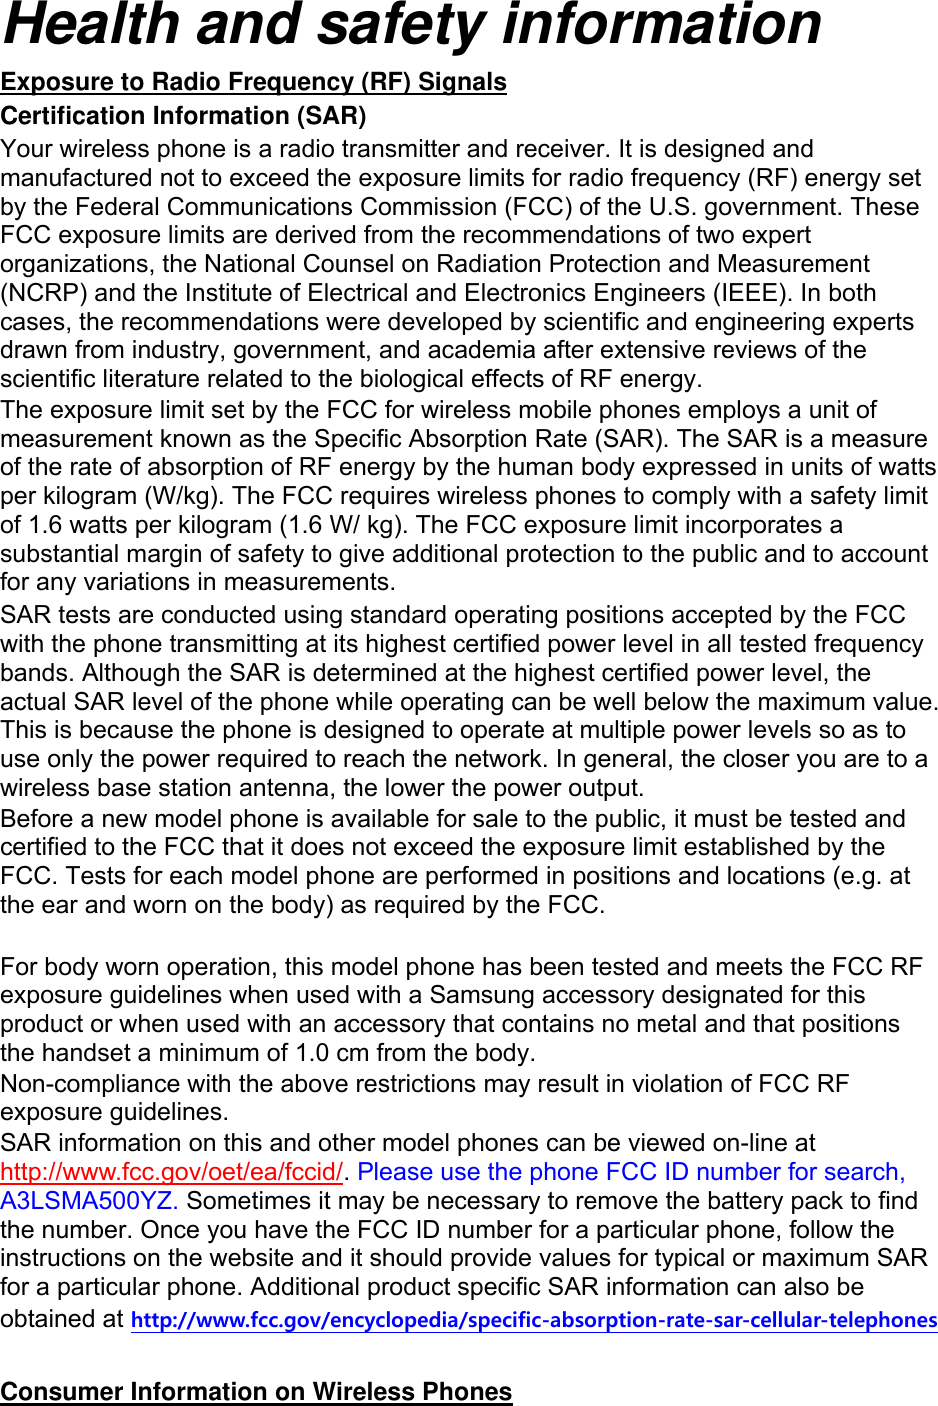 Health and safety information Exposure to Radio Frequency (RF) Signals Certification Information (SAR) Your wireless phone is a radio transmitter and receiver. It is designed and manufactured not to exceed the exposure limits for radio frequency (RF) energy set by the Federal Communications Commission (FCC) of the U.S. government. These FCC exposure limits are derived from the recommendations of two expert organizations, the National Counsel on Radiation Protection and Measurement (NCRP) and the Institute of Electrical and Electronics Engineers (IEEE). In both cases, the recommendations were developed by scientific and engineering experts drawn from industry, government, and academia after extensive reviews of the scientific literature related to the biological effects of RF energy. The exposure limit set by the FCC for wireless mobile phones employs a unit of measurement known as the Specific Absorption Rate (SAR). The SAR is a measure of the rate of absorption of RF energy by the human body expressed in units of watts per kilogram (W/kg). The FCC requires wireless phones to comply with a safety limit of 1.6 watts per kilogram (1.6 W/ kg). The FCC exposure limit incorporates a substantial margin of safety to give additional protection to the public and to account for any variations in measurements. SAR tests are conducted using standard operating positions accepted by the FCC with the phone transmitting at its highest certified power level in all tested frequency bands. Although the SAR is determined at the highest certified power level, the actual SAR level of the phone while operating can be well below the maximum value. This is because the phone is designed to operate at multiple power levels so as to use only the power required to reach the network. In general, the closer you are to a wireless base station antenna, the lower the power output. Before a new model phone is available for sale to the public, it must be tested and certified to the FCC that it does not exceed the exposure limit established by the FCC. Tests for each model phone are performed in positions and locations (e.g. at the ear and worn on the body) as required by the FCC.      For body worn operation, this model phone has been tested and meets the FCC RF exposure guidelines when used with a Samsung accessory designated for this product or when used with an accessory that contains no metal and that positions the handset a minimum of 1.0 cm from the body.   Non-compliance with the above restrictions may result in violation of FCC RF exposure guidelines. SAR information on this and other model phones can be viewed on-line at http://www.fcc.gov/oet/ea/fccid/. Please use the phone FCC ID number for search, A3LSMA500YZ. Sometimes it may be necessary to remove the battery pack to find the number. Once you have the FCC ID number for a particular phone, follow the instructions on the website and it should provide values for typical or maximum SAR for a particular phone. Additional product specific SAR information can also be obtained at http://www.fcc.gov/encyclopedia/specific-absorption-rate-sar-cellular-telephones  Consumer Information on Wireless Phones 